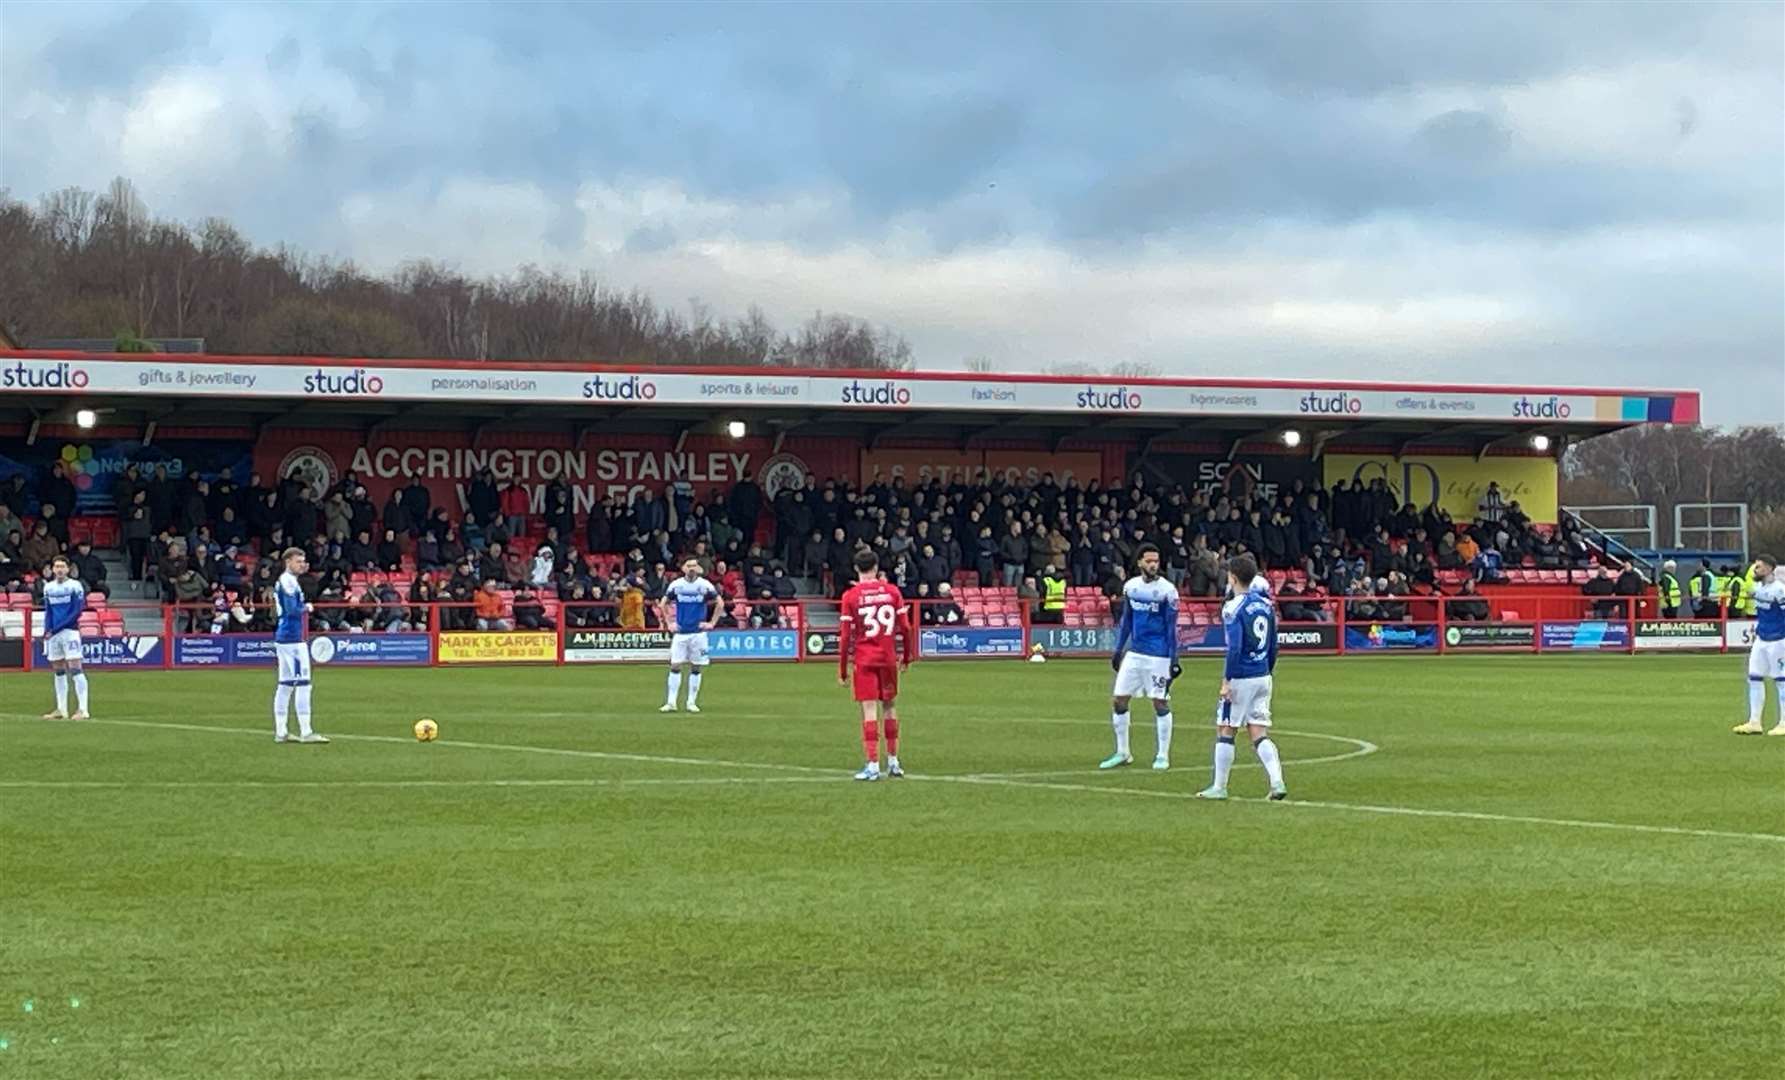 The away following for Gillingham at Accrington